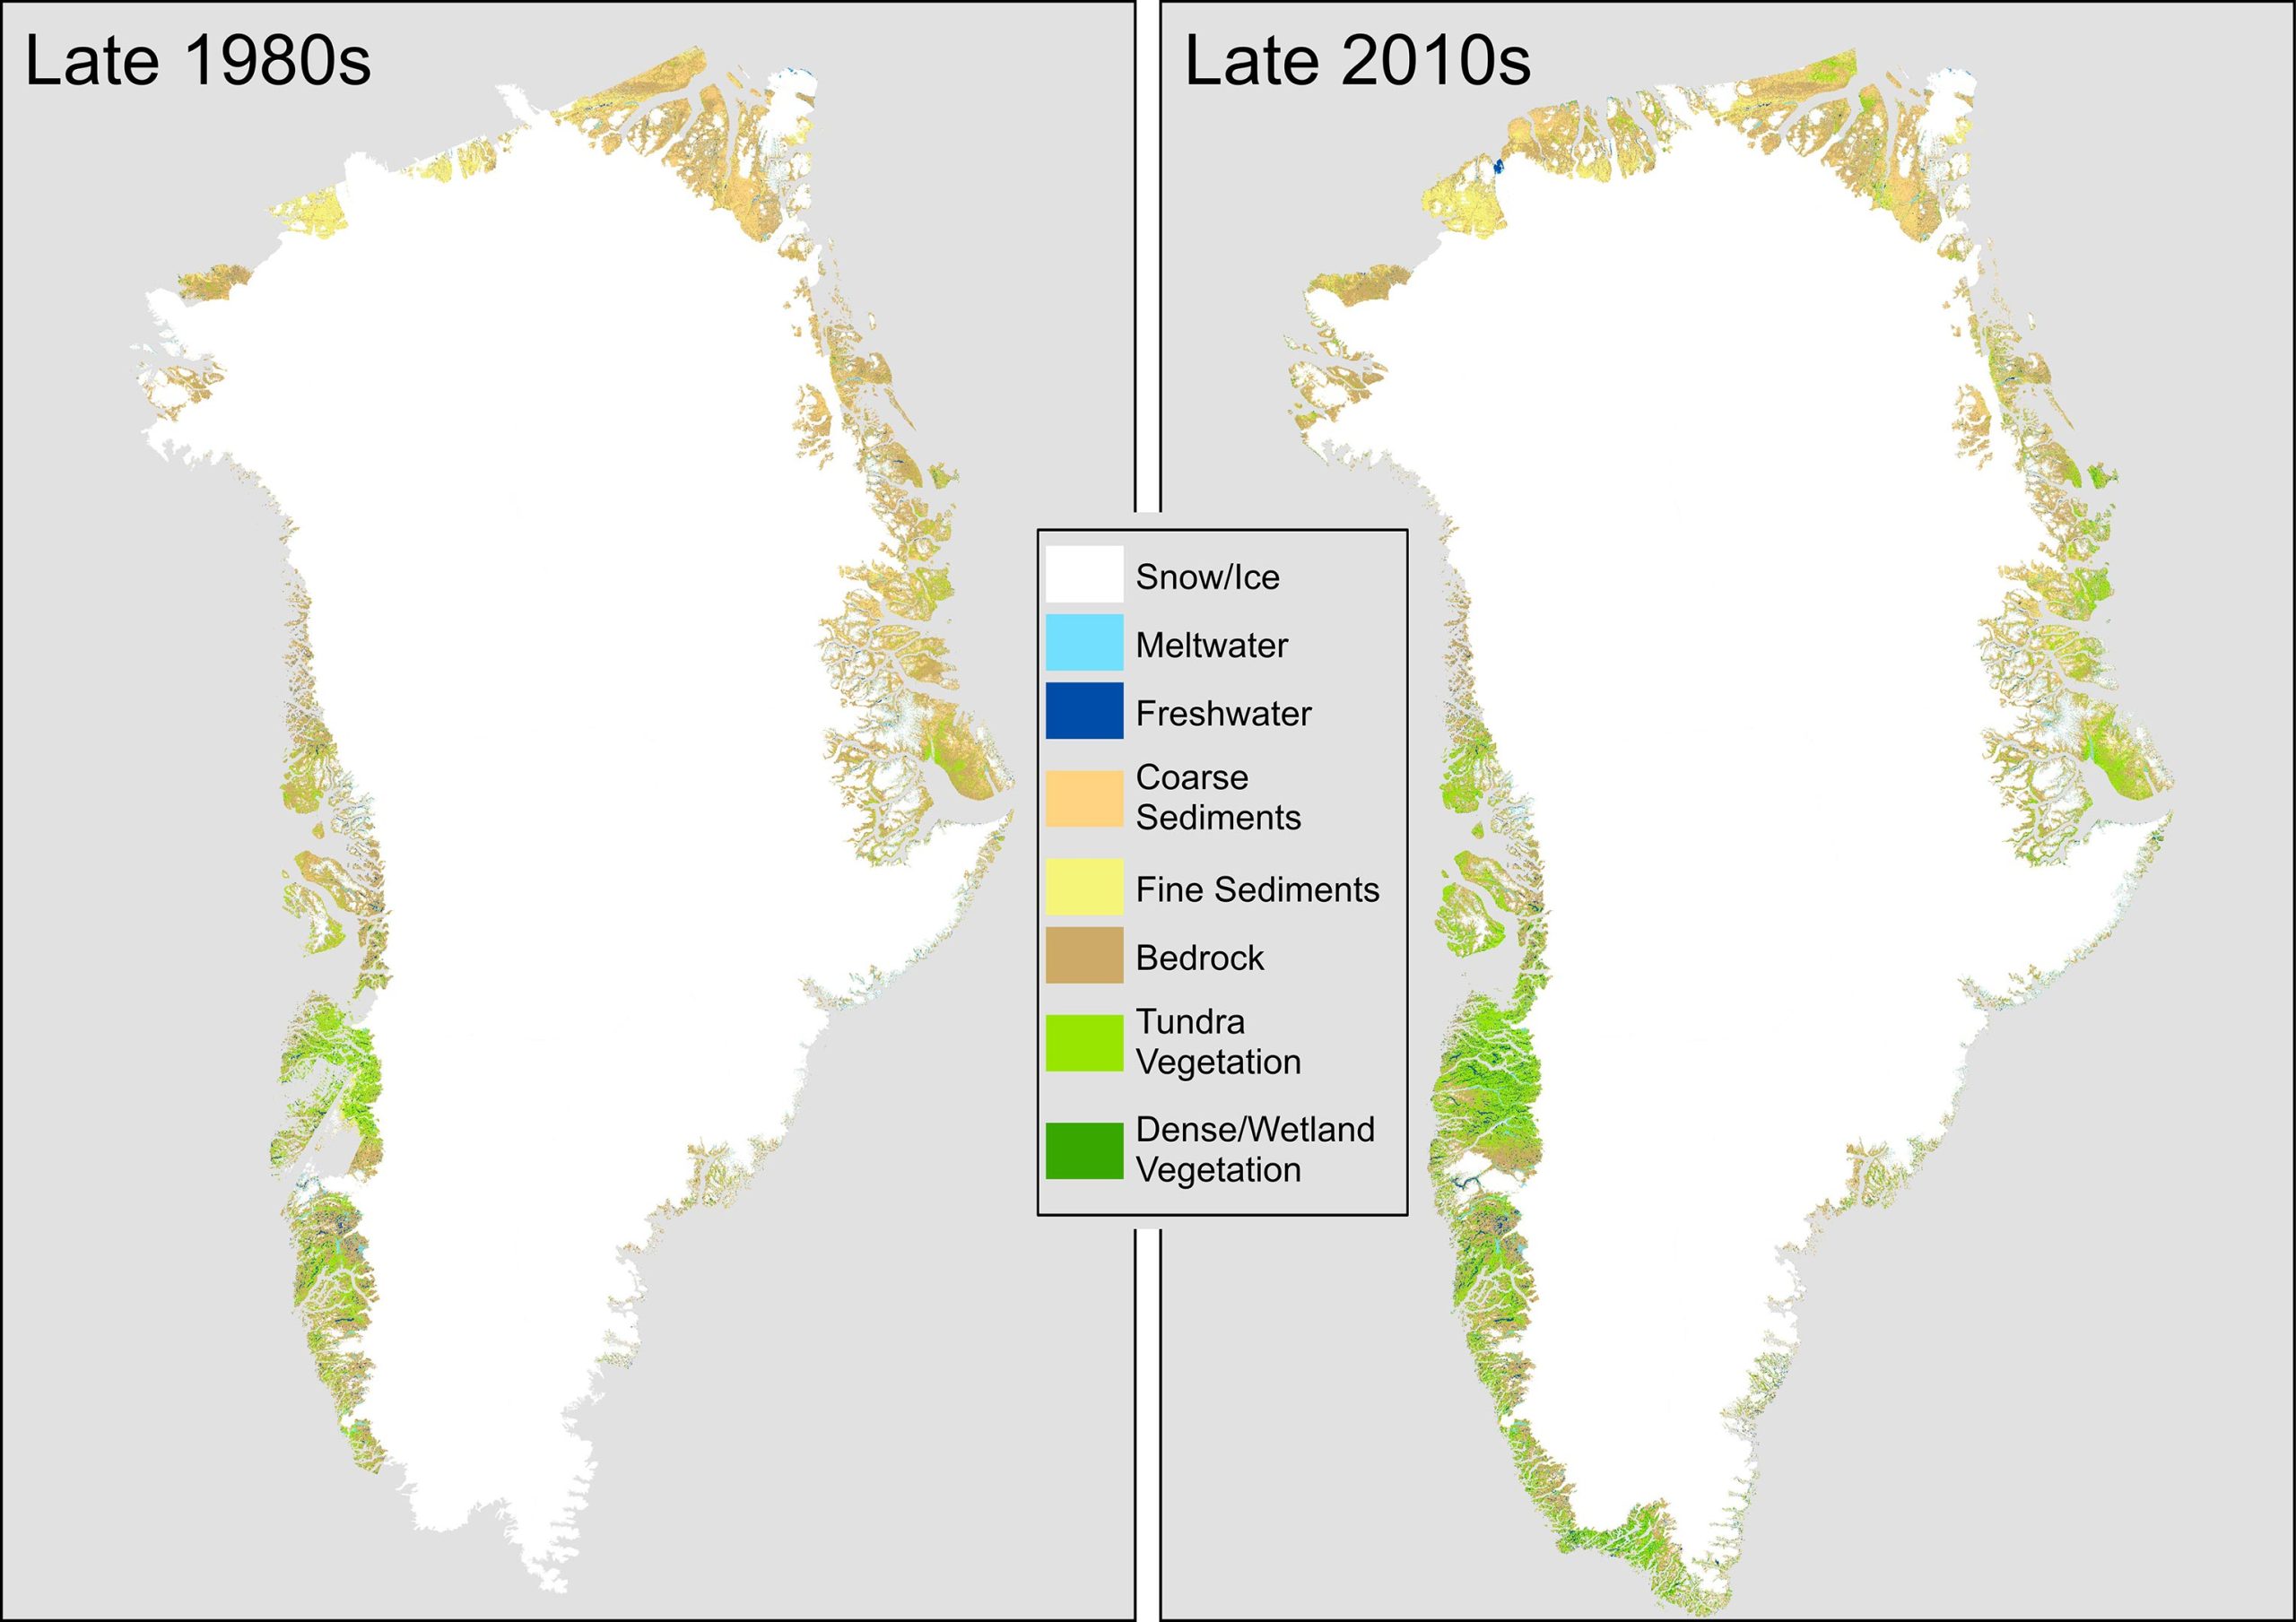 Greenland-Comparison-Between-Landcover-Classifications-scaled.jpg